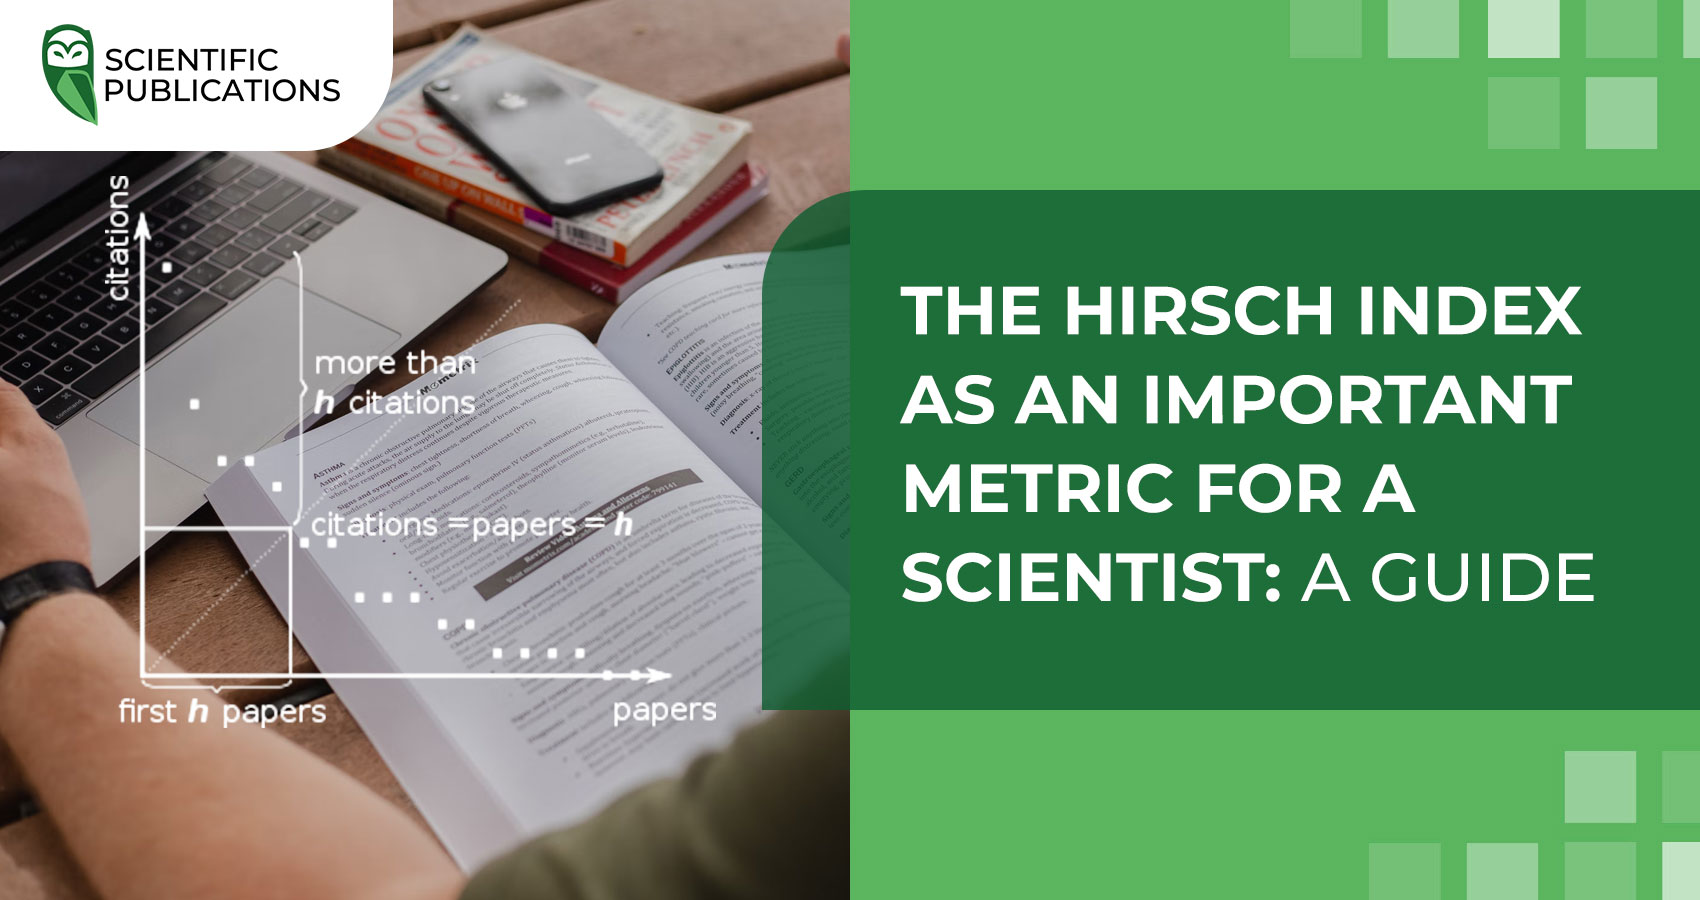 The Hirsch Index as an important metric for a scientist: a guide